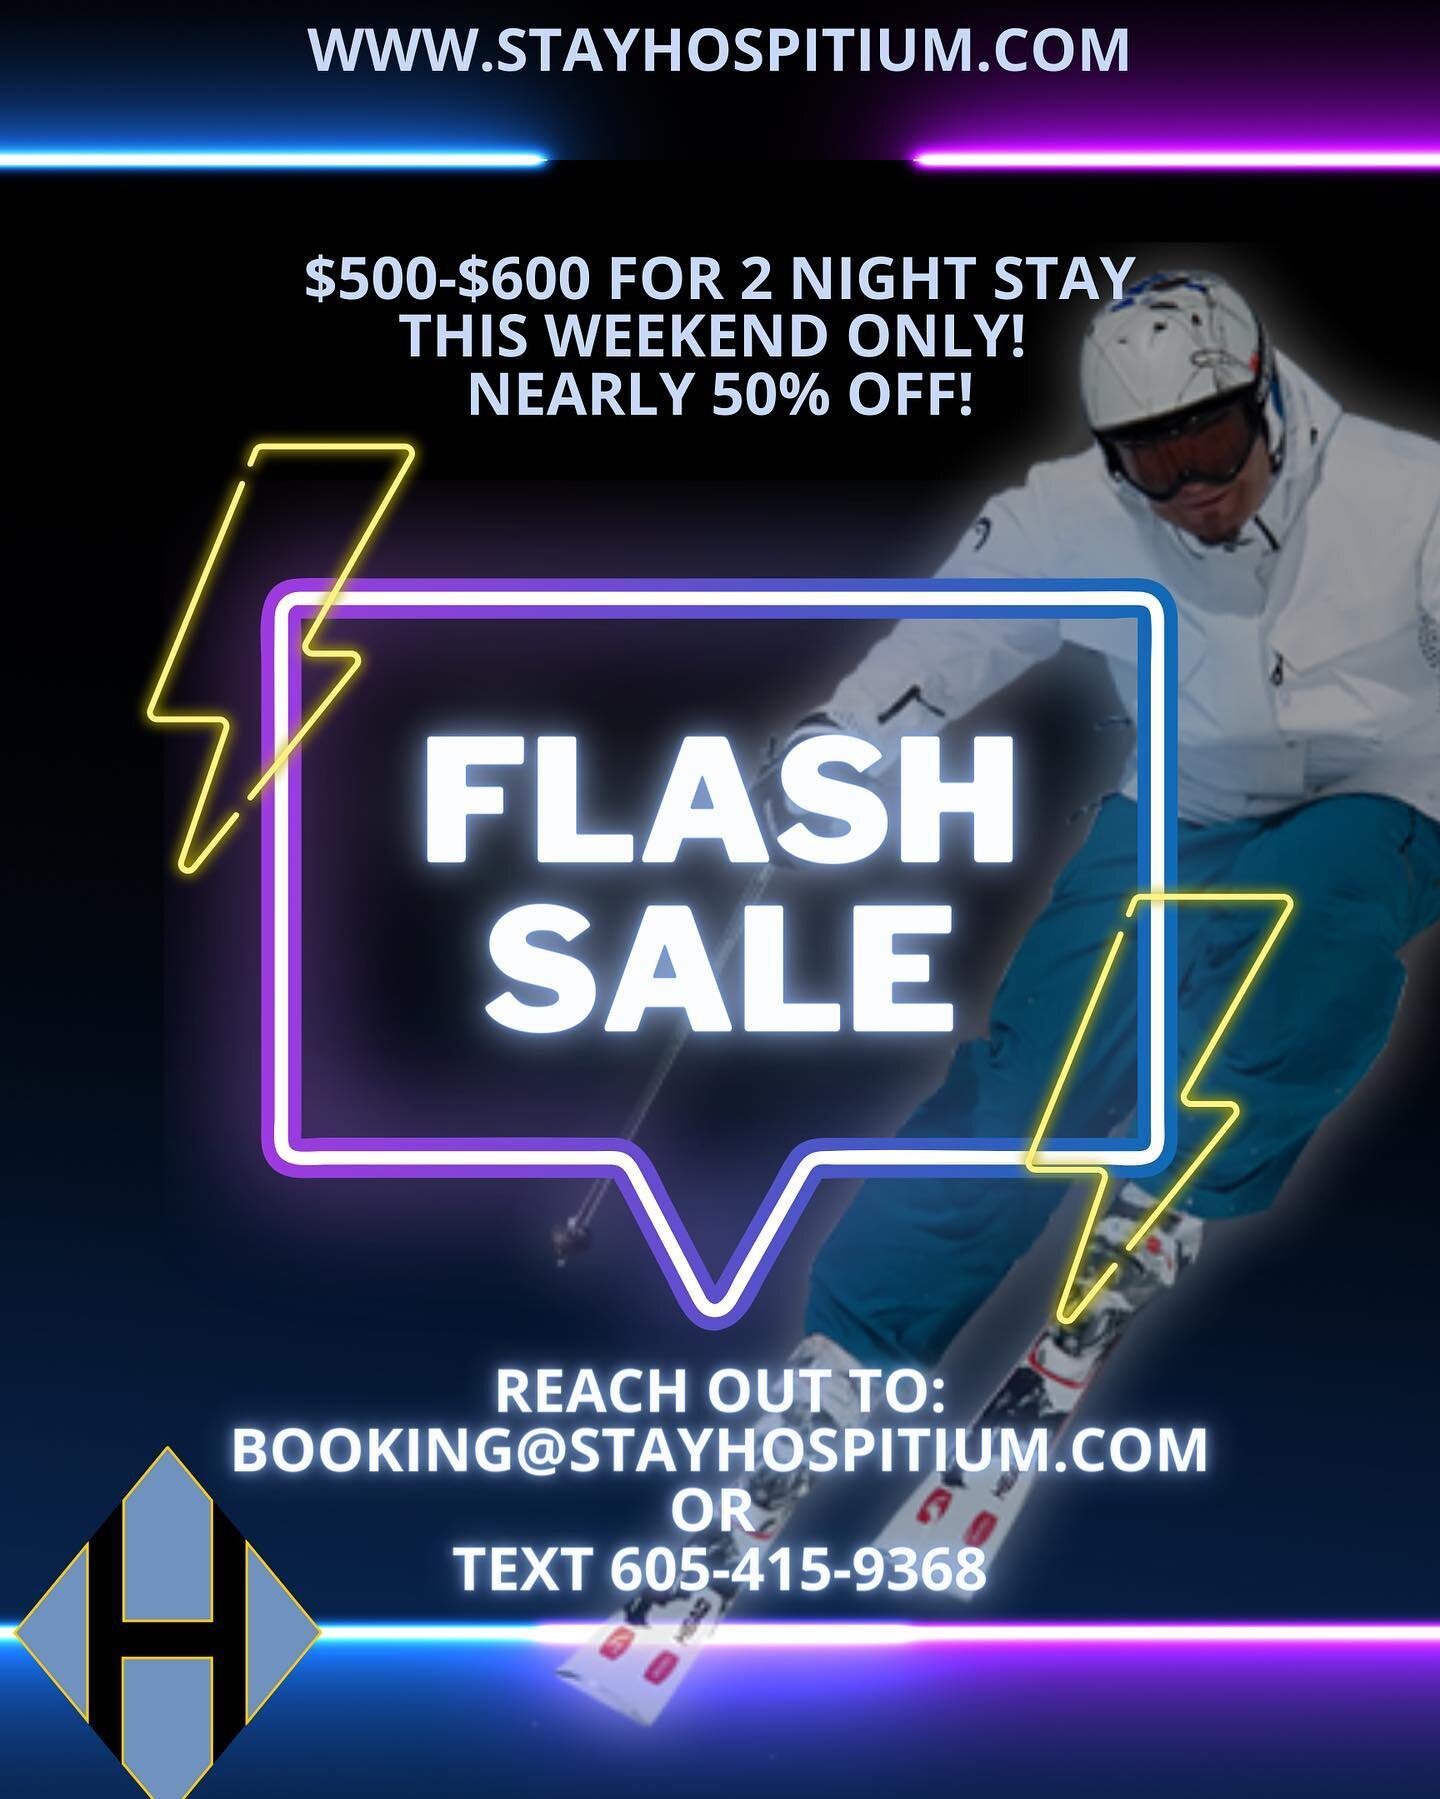 FLASH SALE! This weekend ONLY! Reach out to us today and we can get you scheduled for check in tomorrow! Crazy deal! Go enjoy time with your family and hit the slopes at Terry Peak! Call/Text/Email to get booking organized. We have cabin options! 
#s